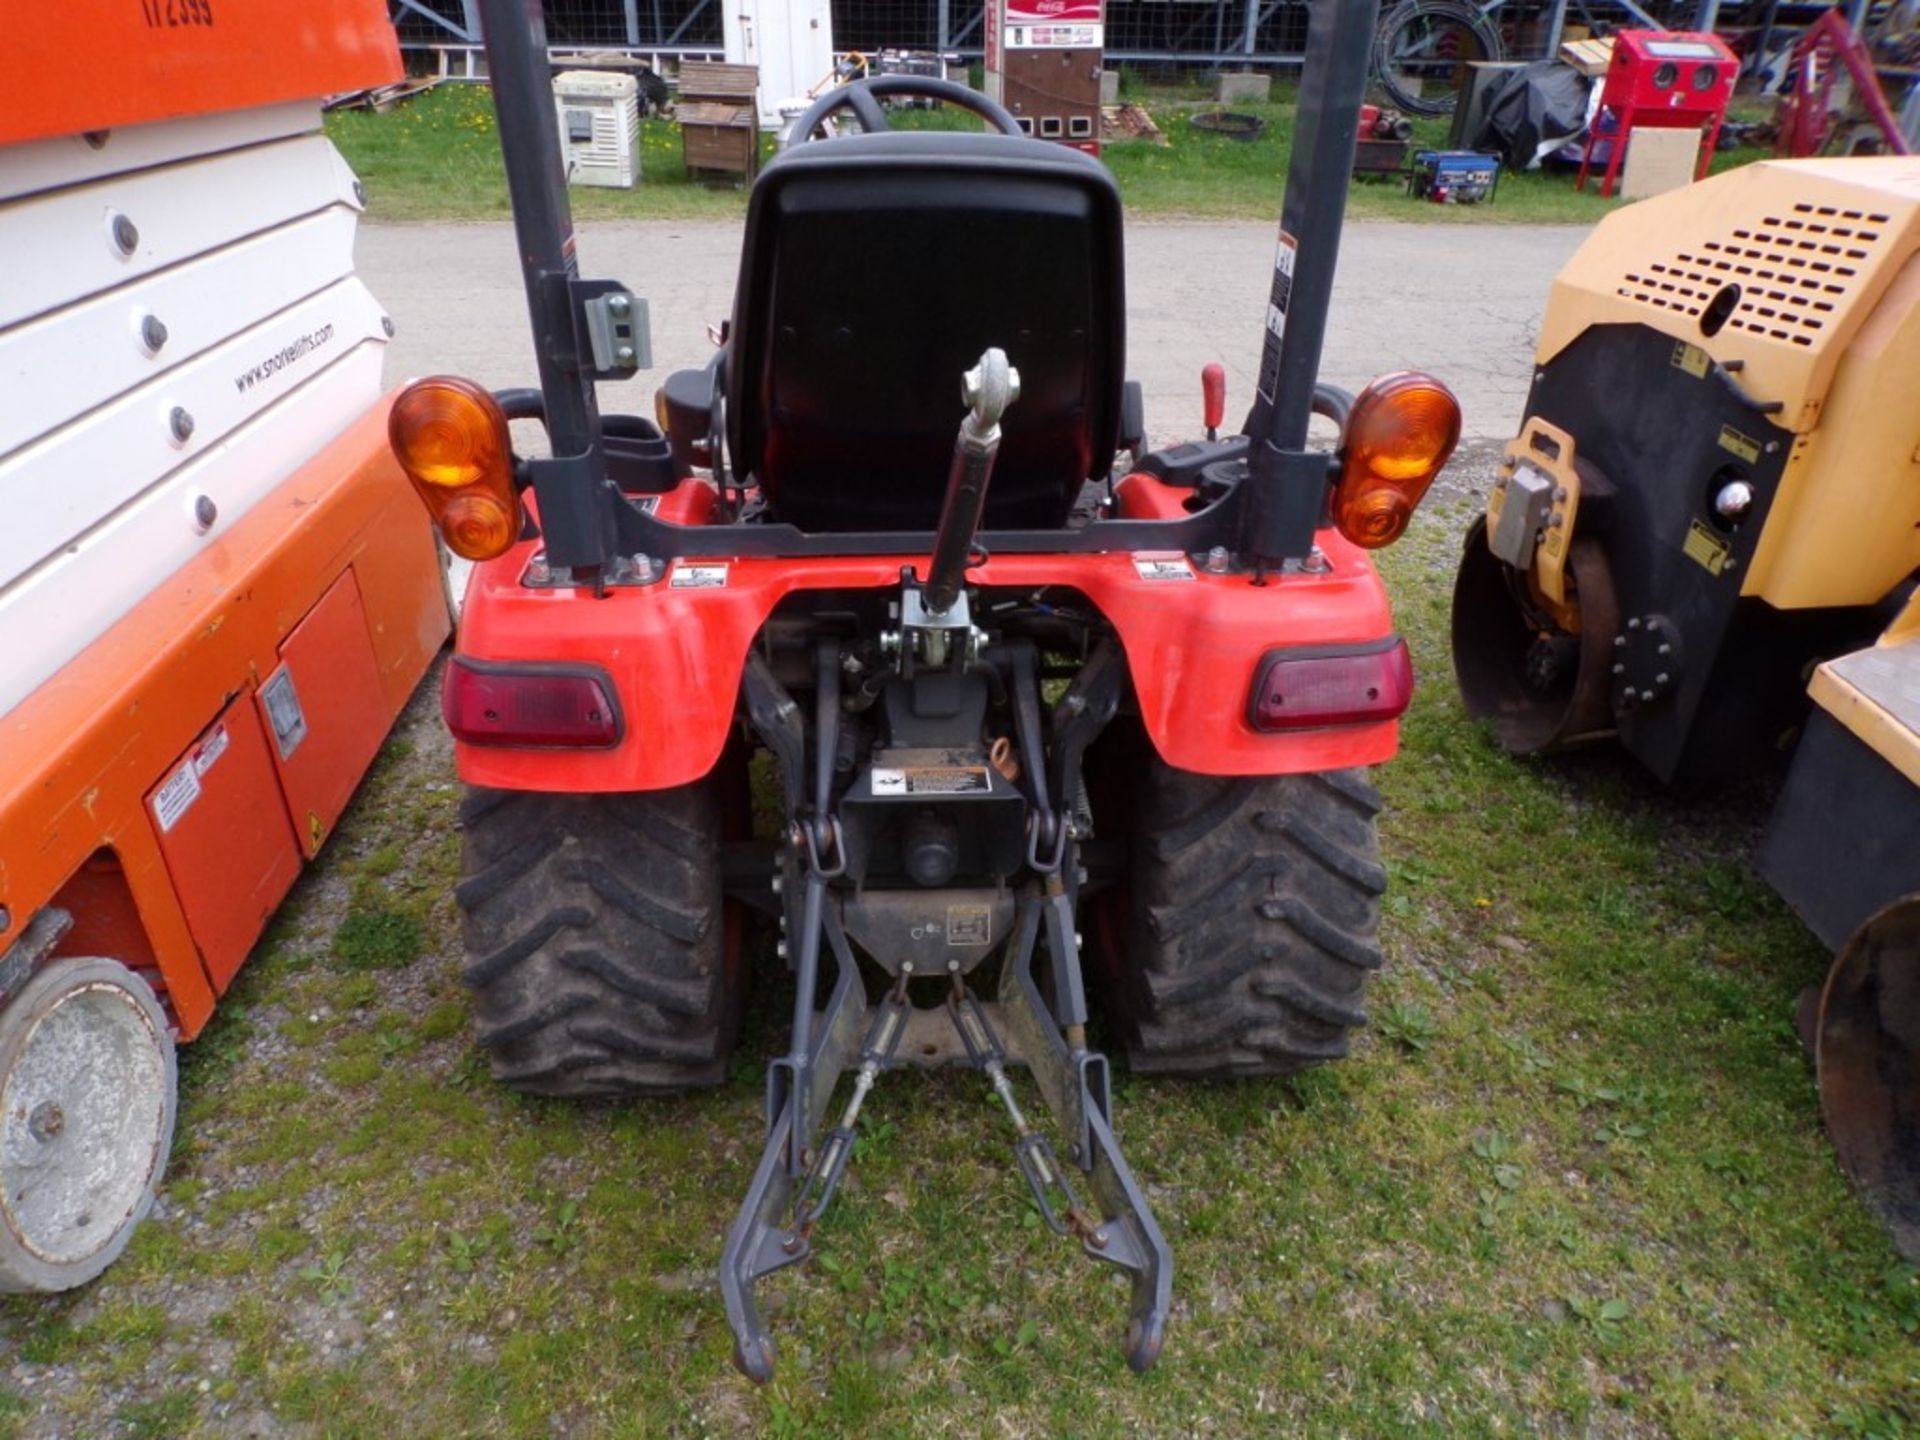 Kubota BX1870 4wd Sub Compact Tractor, Hydro, 400 Hrs., DENTED HOOD, 3pth, S/N 24593 (4424) - Image 4 of 4